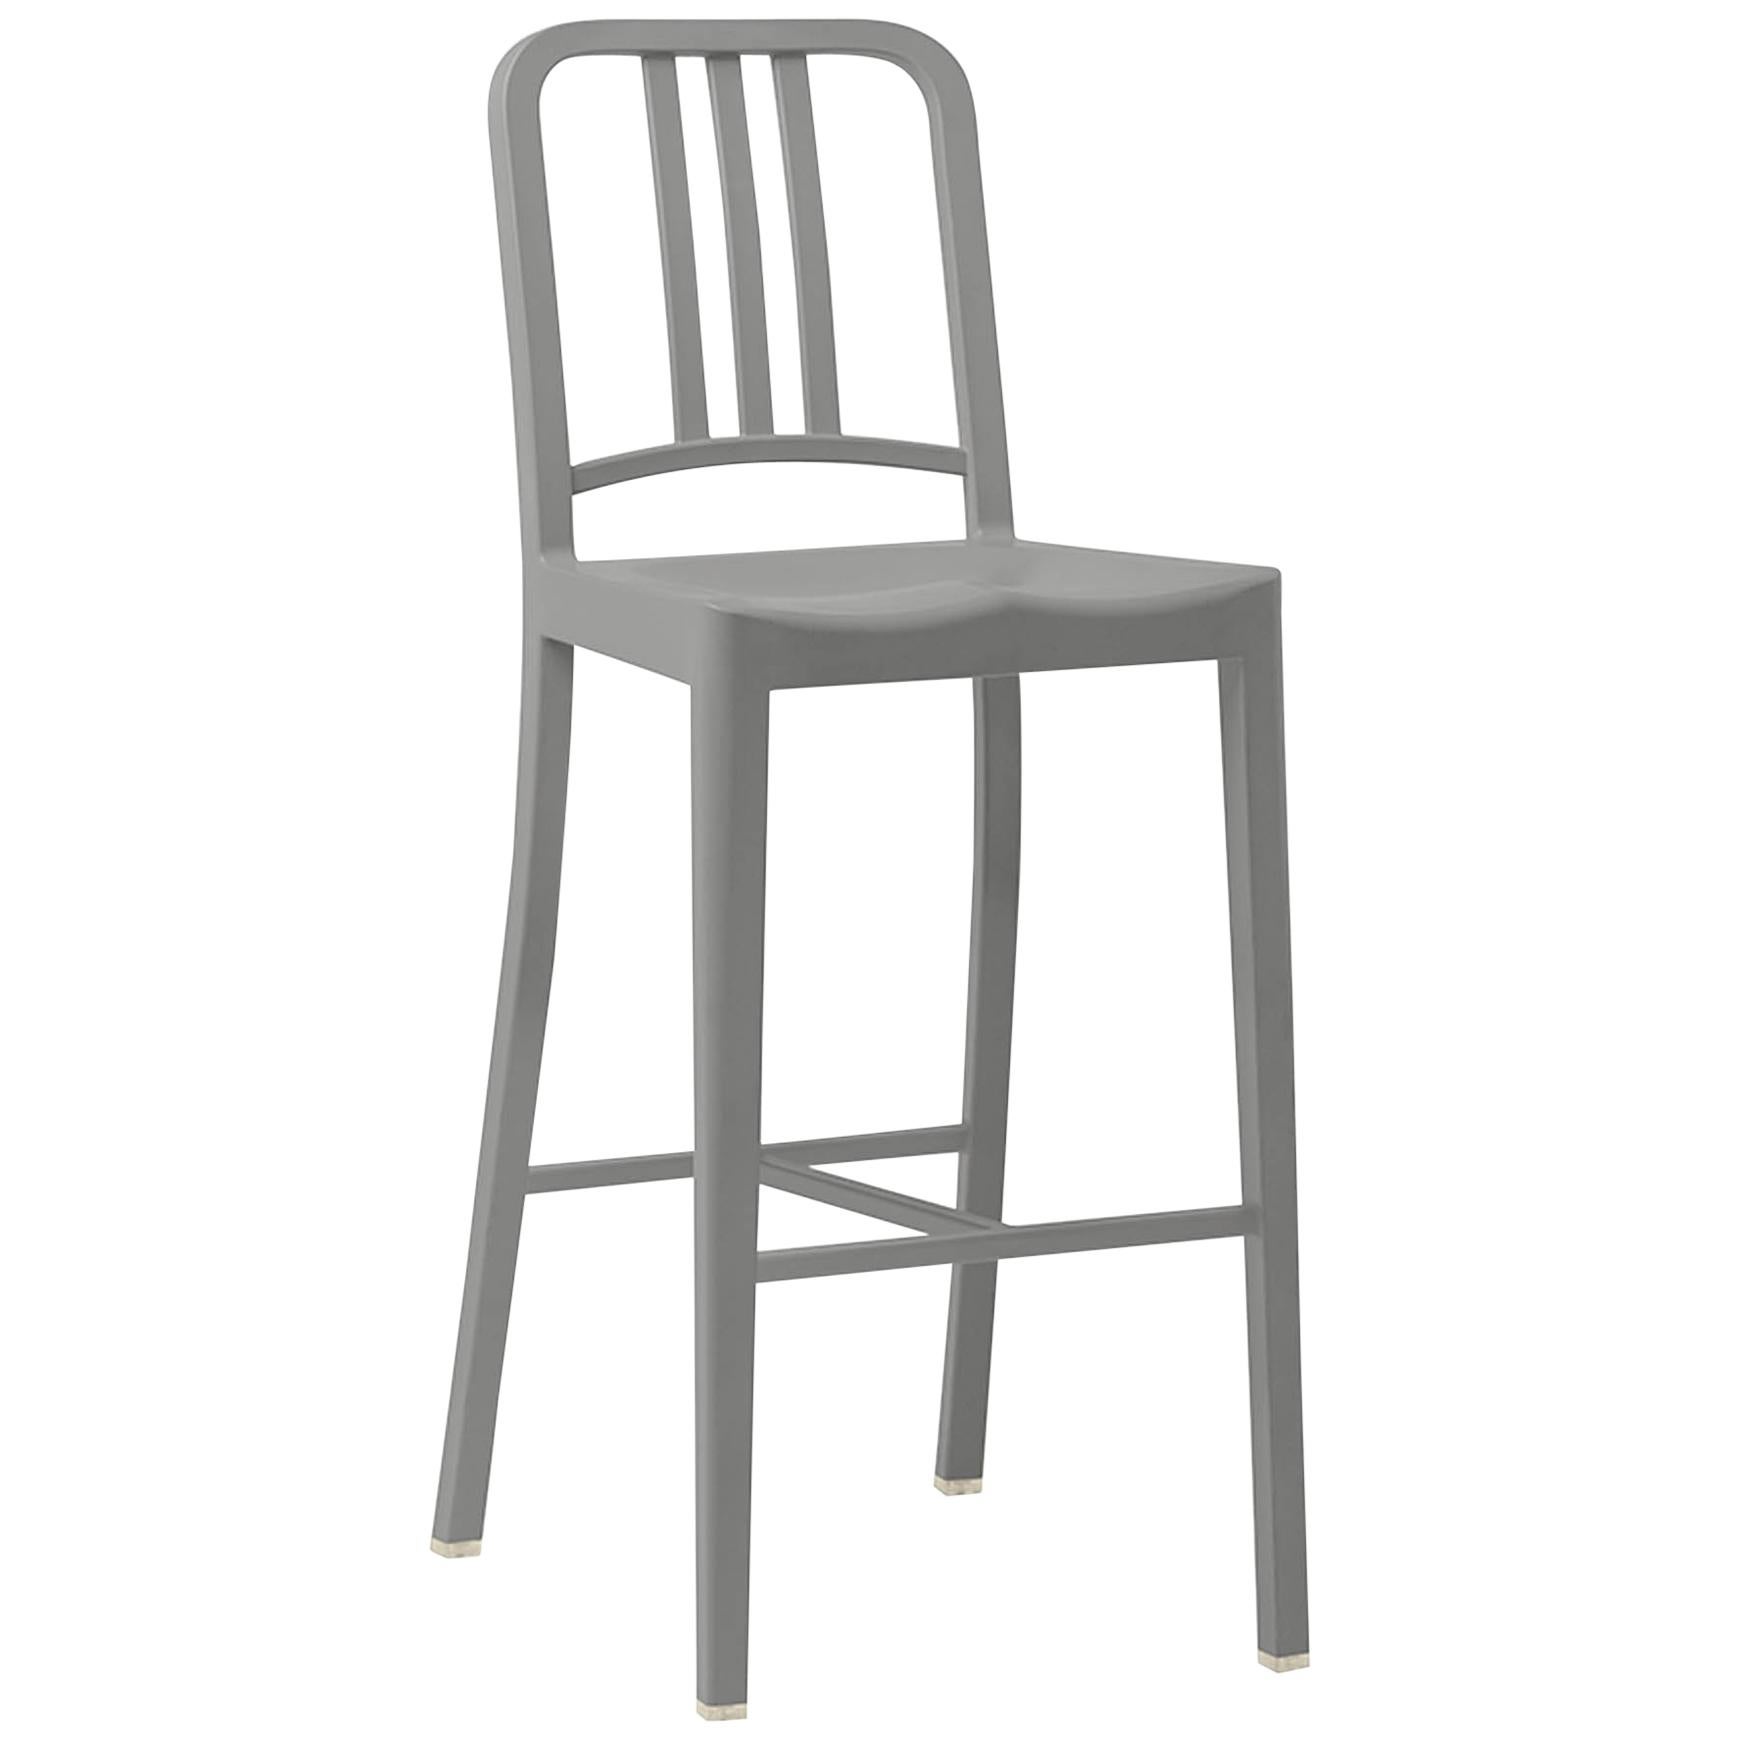 Emeco 111 Navy Barstool in Flint by Coca-Cola For Sale